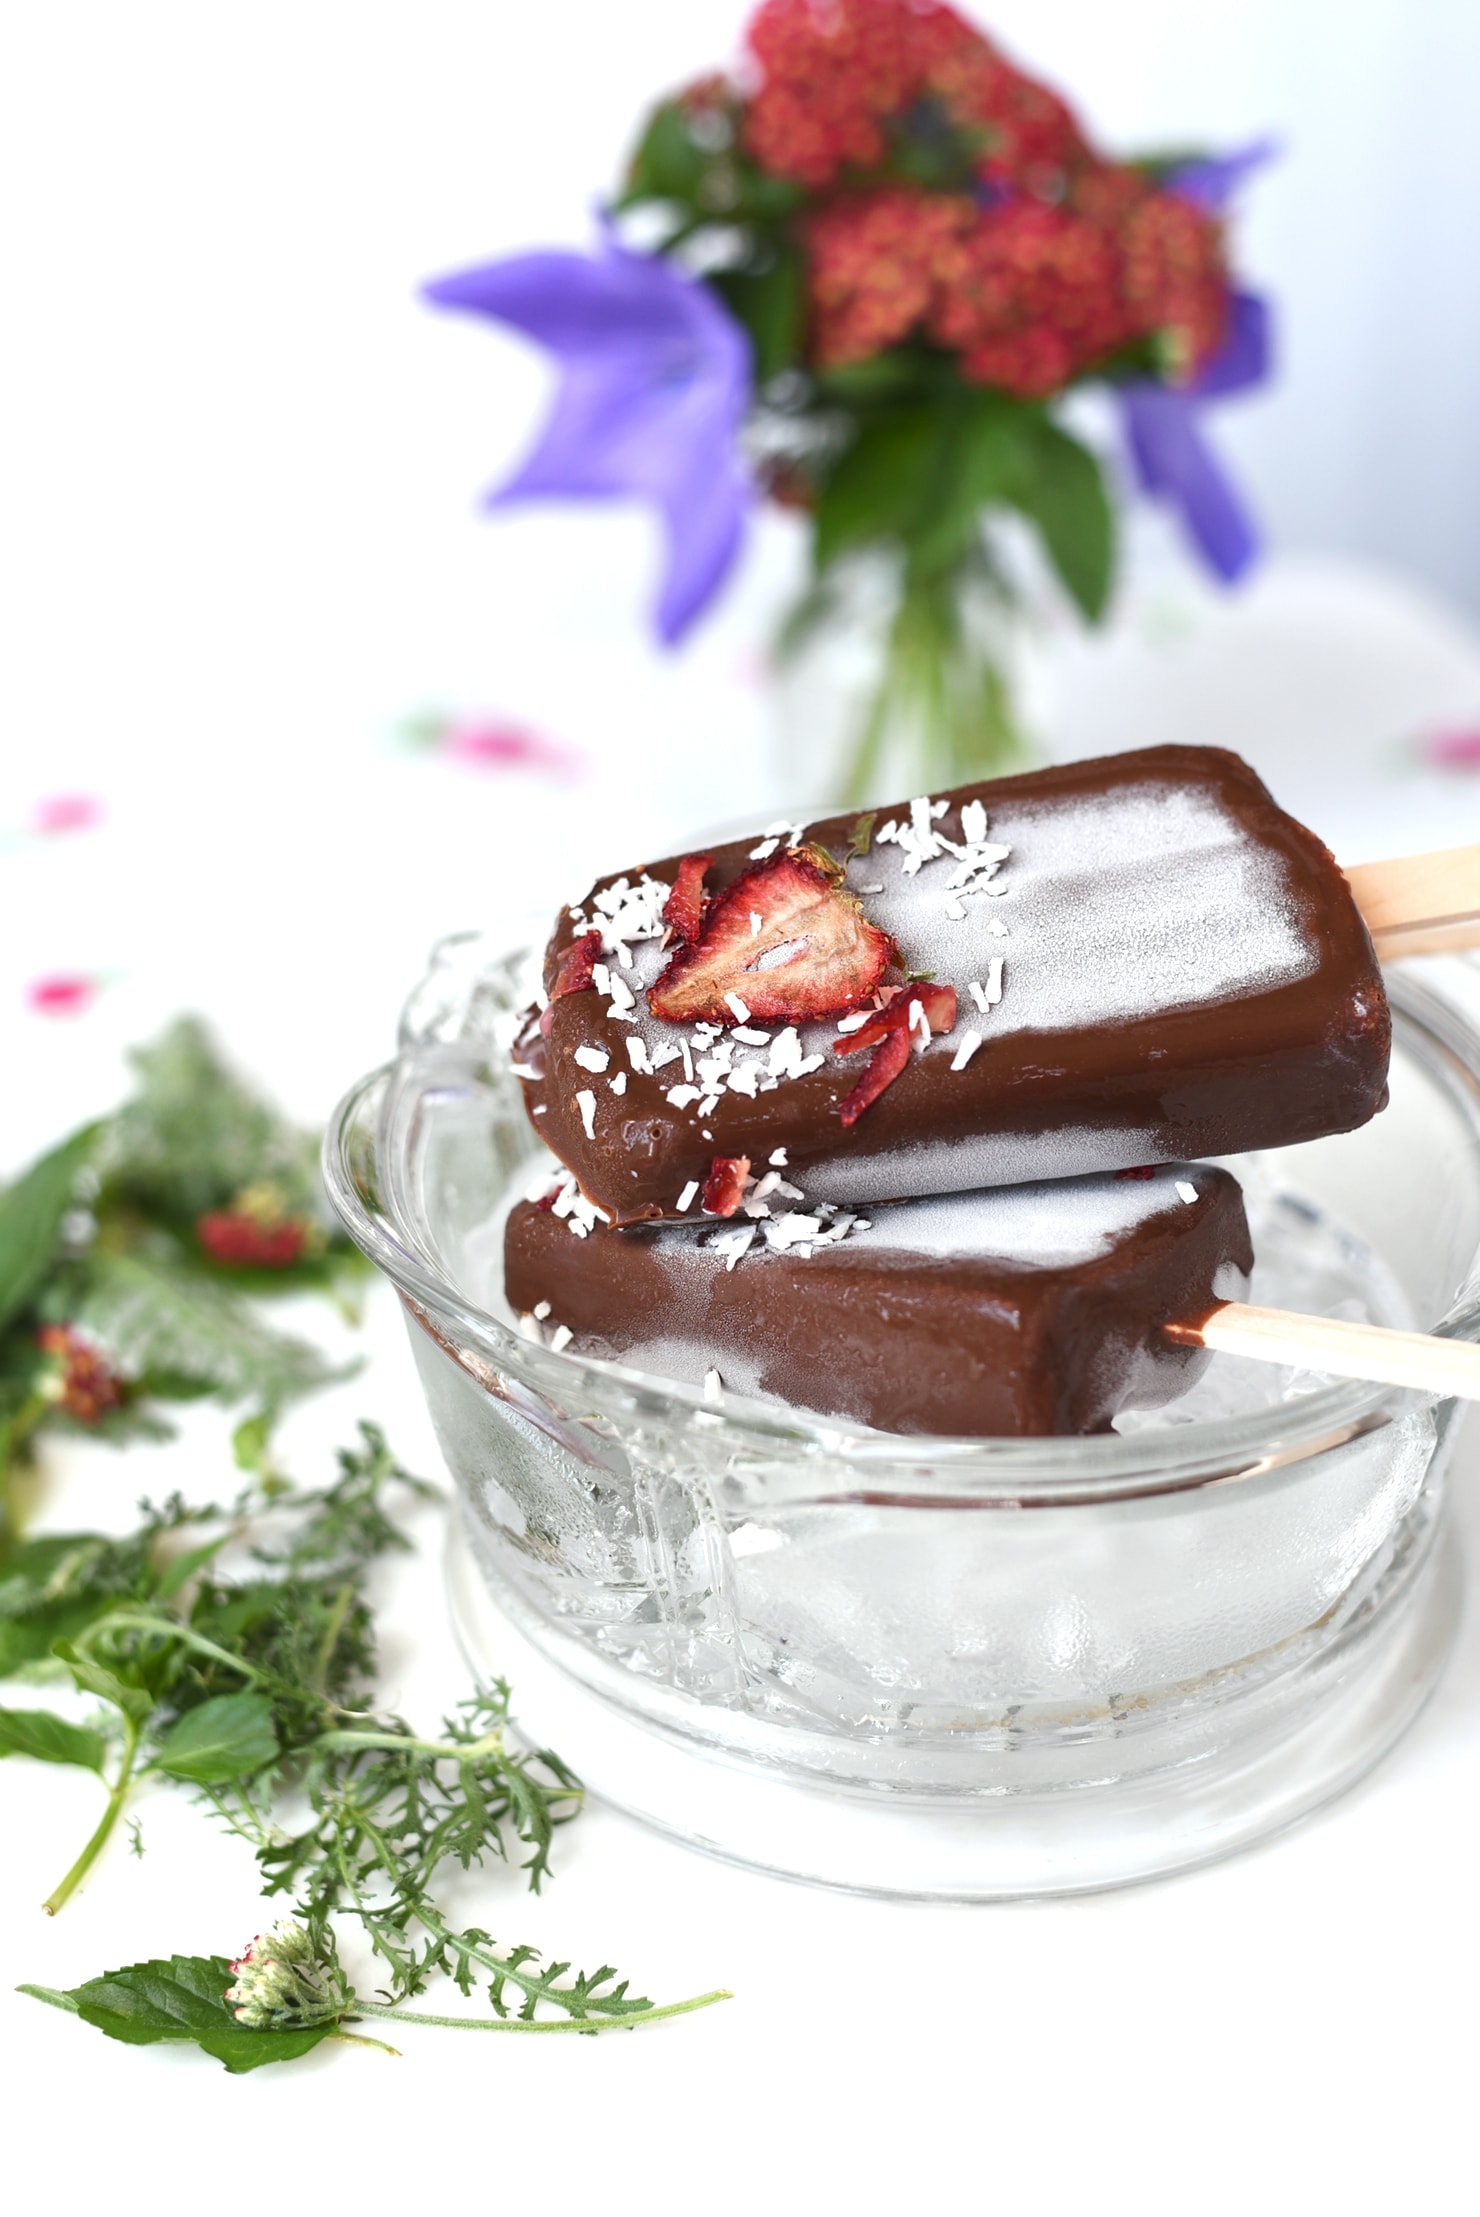 Chocolate Dipped Strawberry Coconut Popsicles 0448 Web 1480px - Chocolate Dipped Strawberry Coconut Popsicles